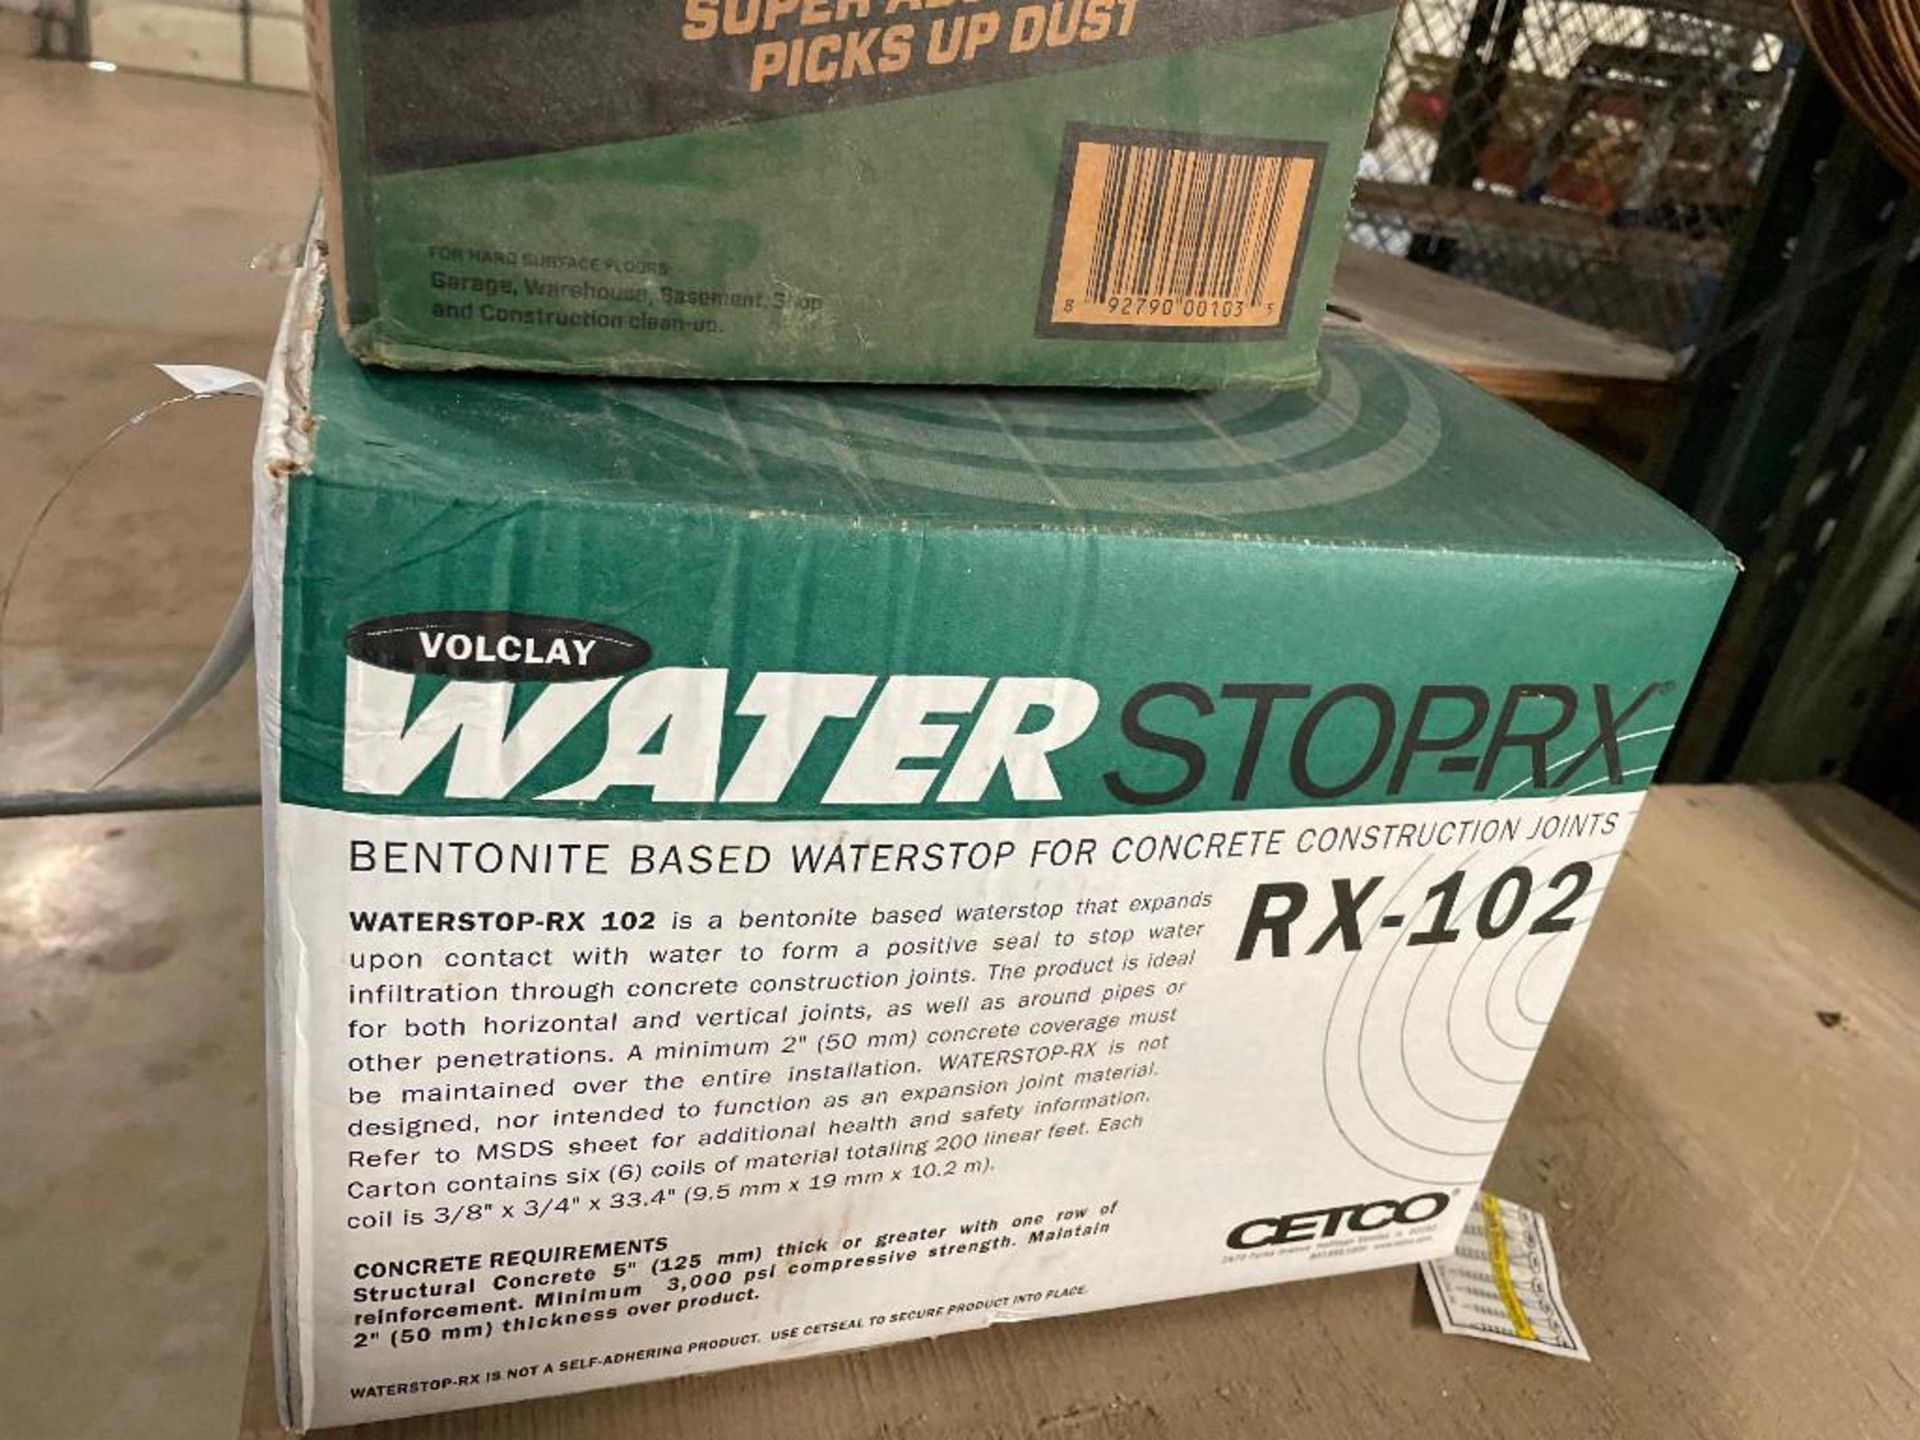 Lot of (1) Box RX-102 Waterstop-RX, Bentonite Based Waterstop for Concrete Construction Jo - Image 3 of 5